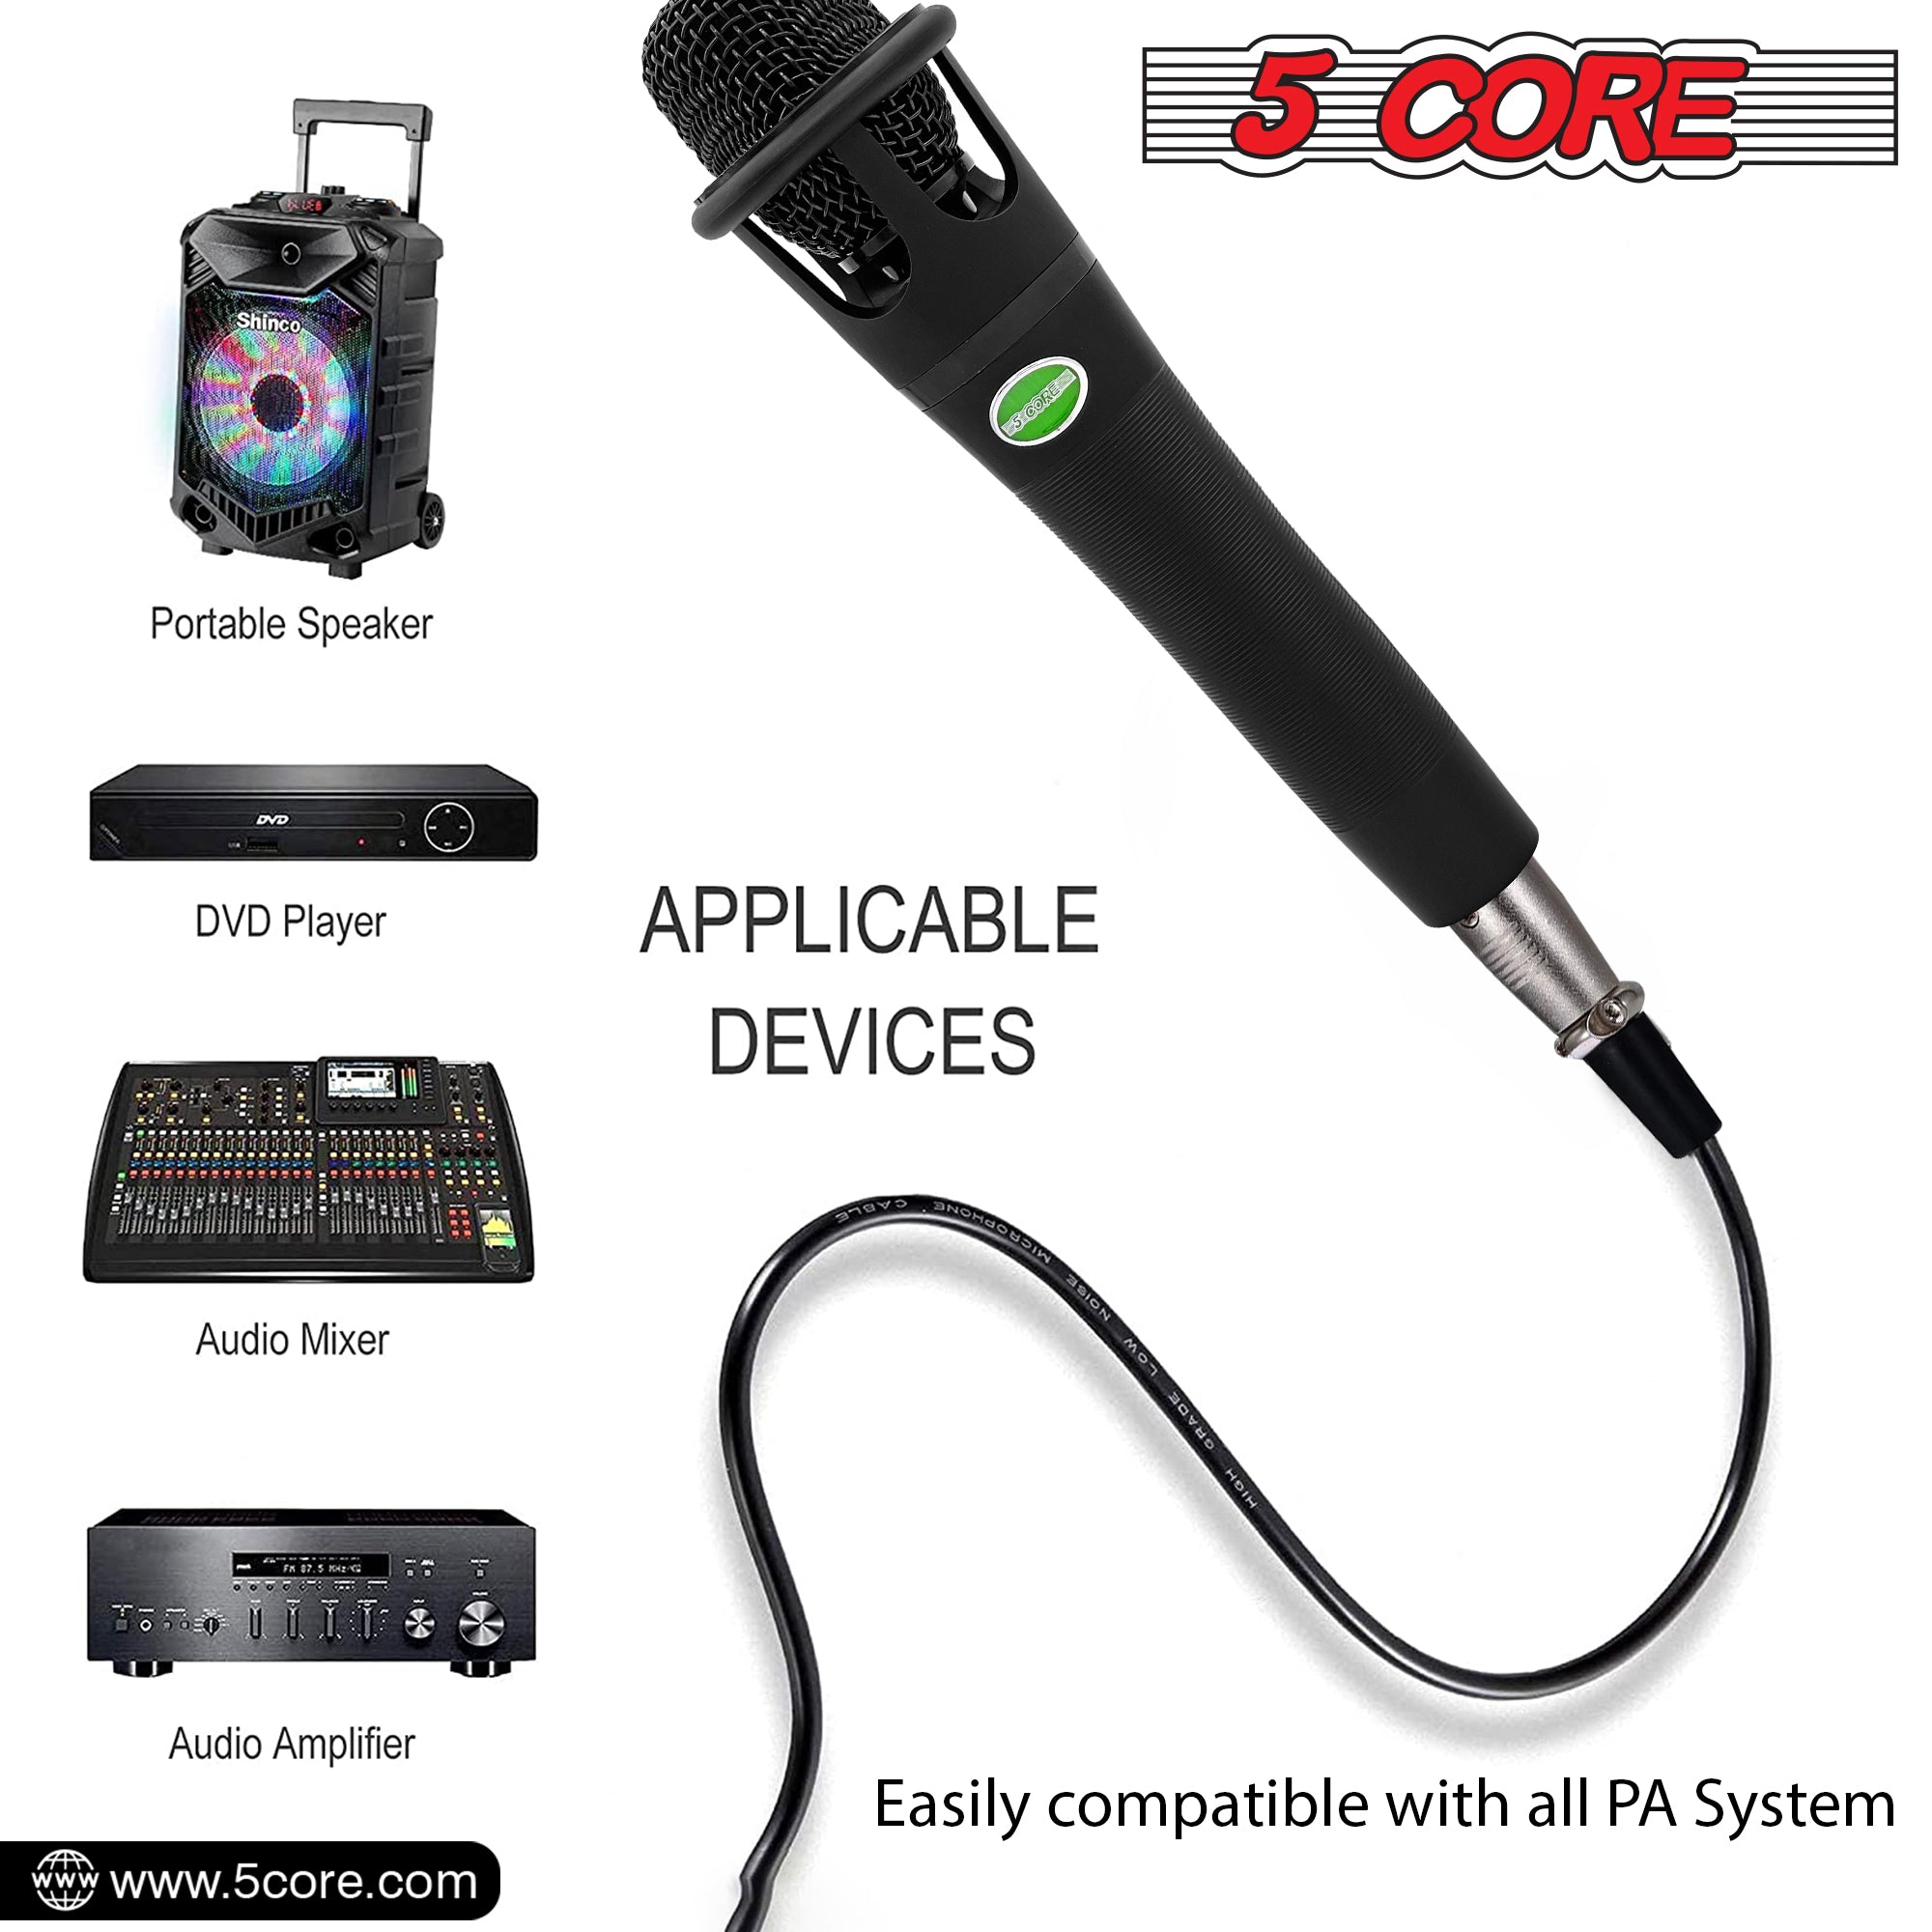 easily compatible with all PA system